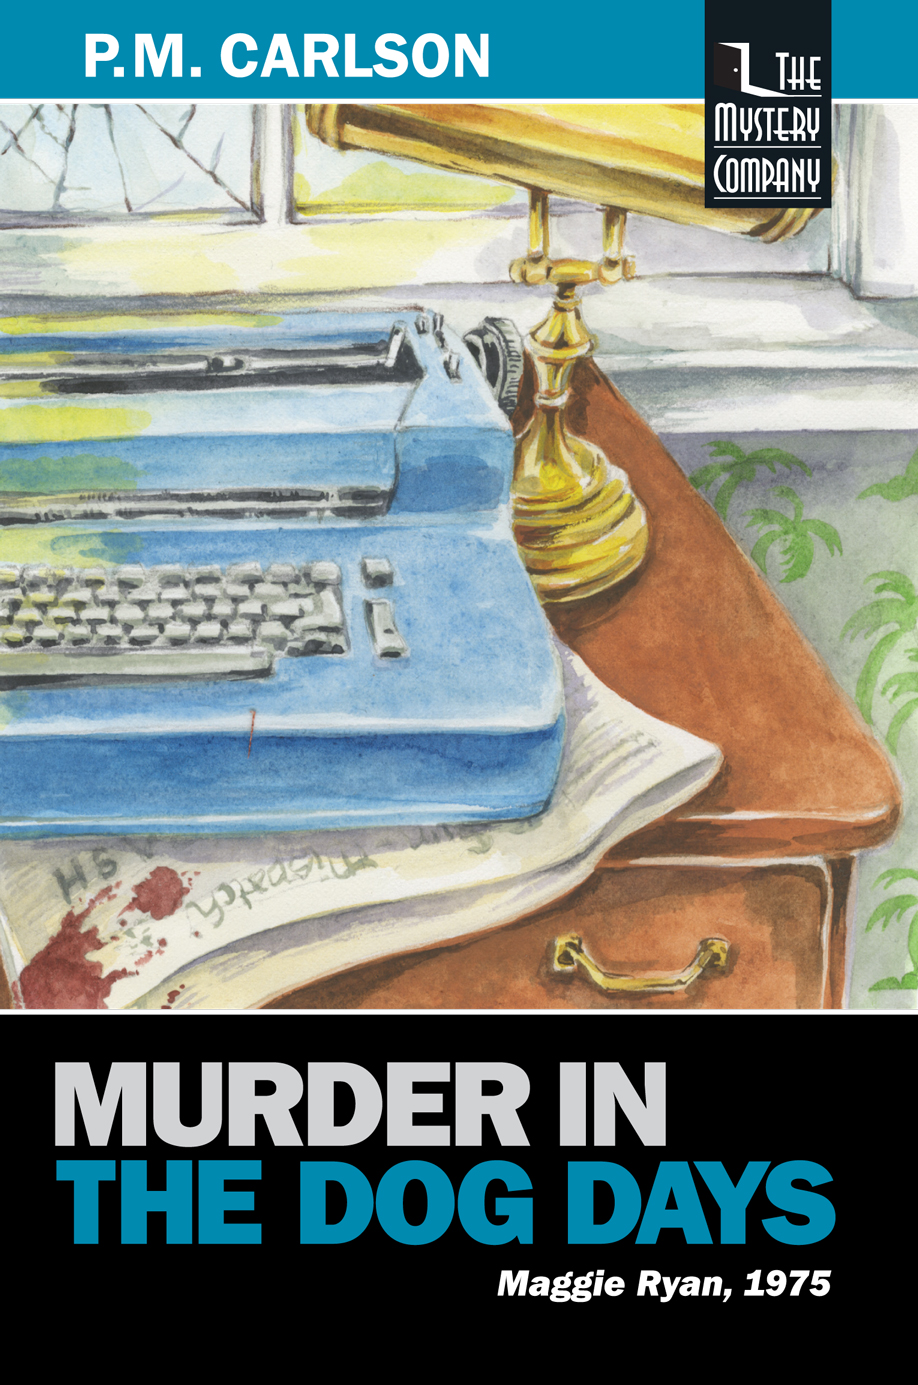 Murder in the Dog Days by P.M. Carlson